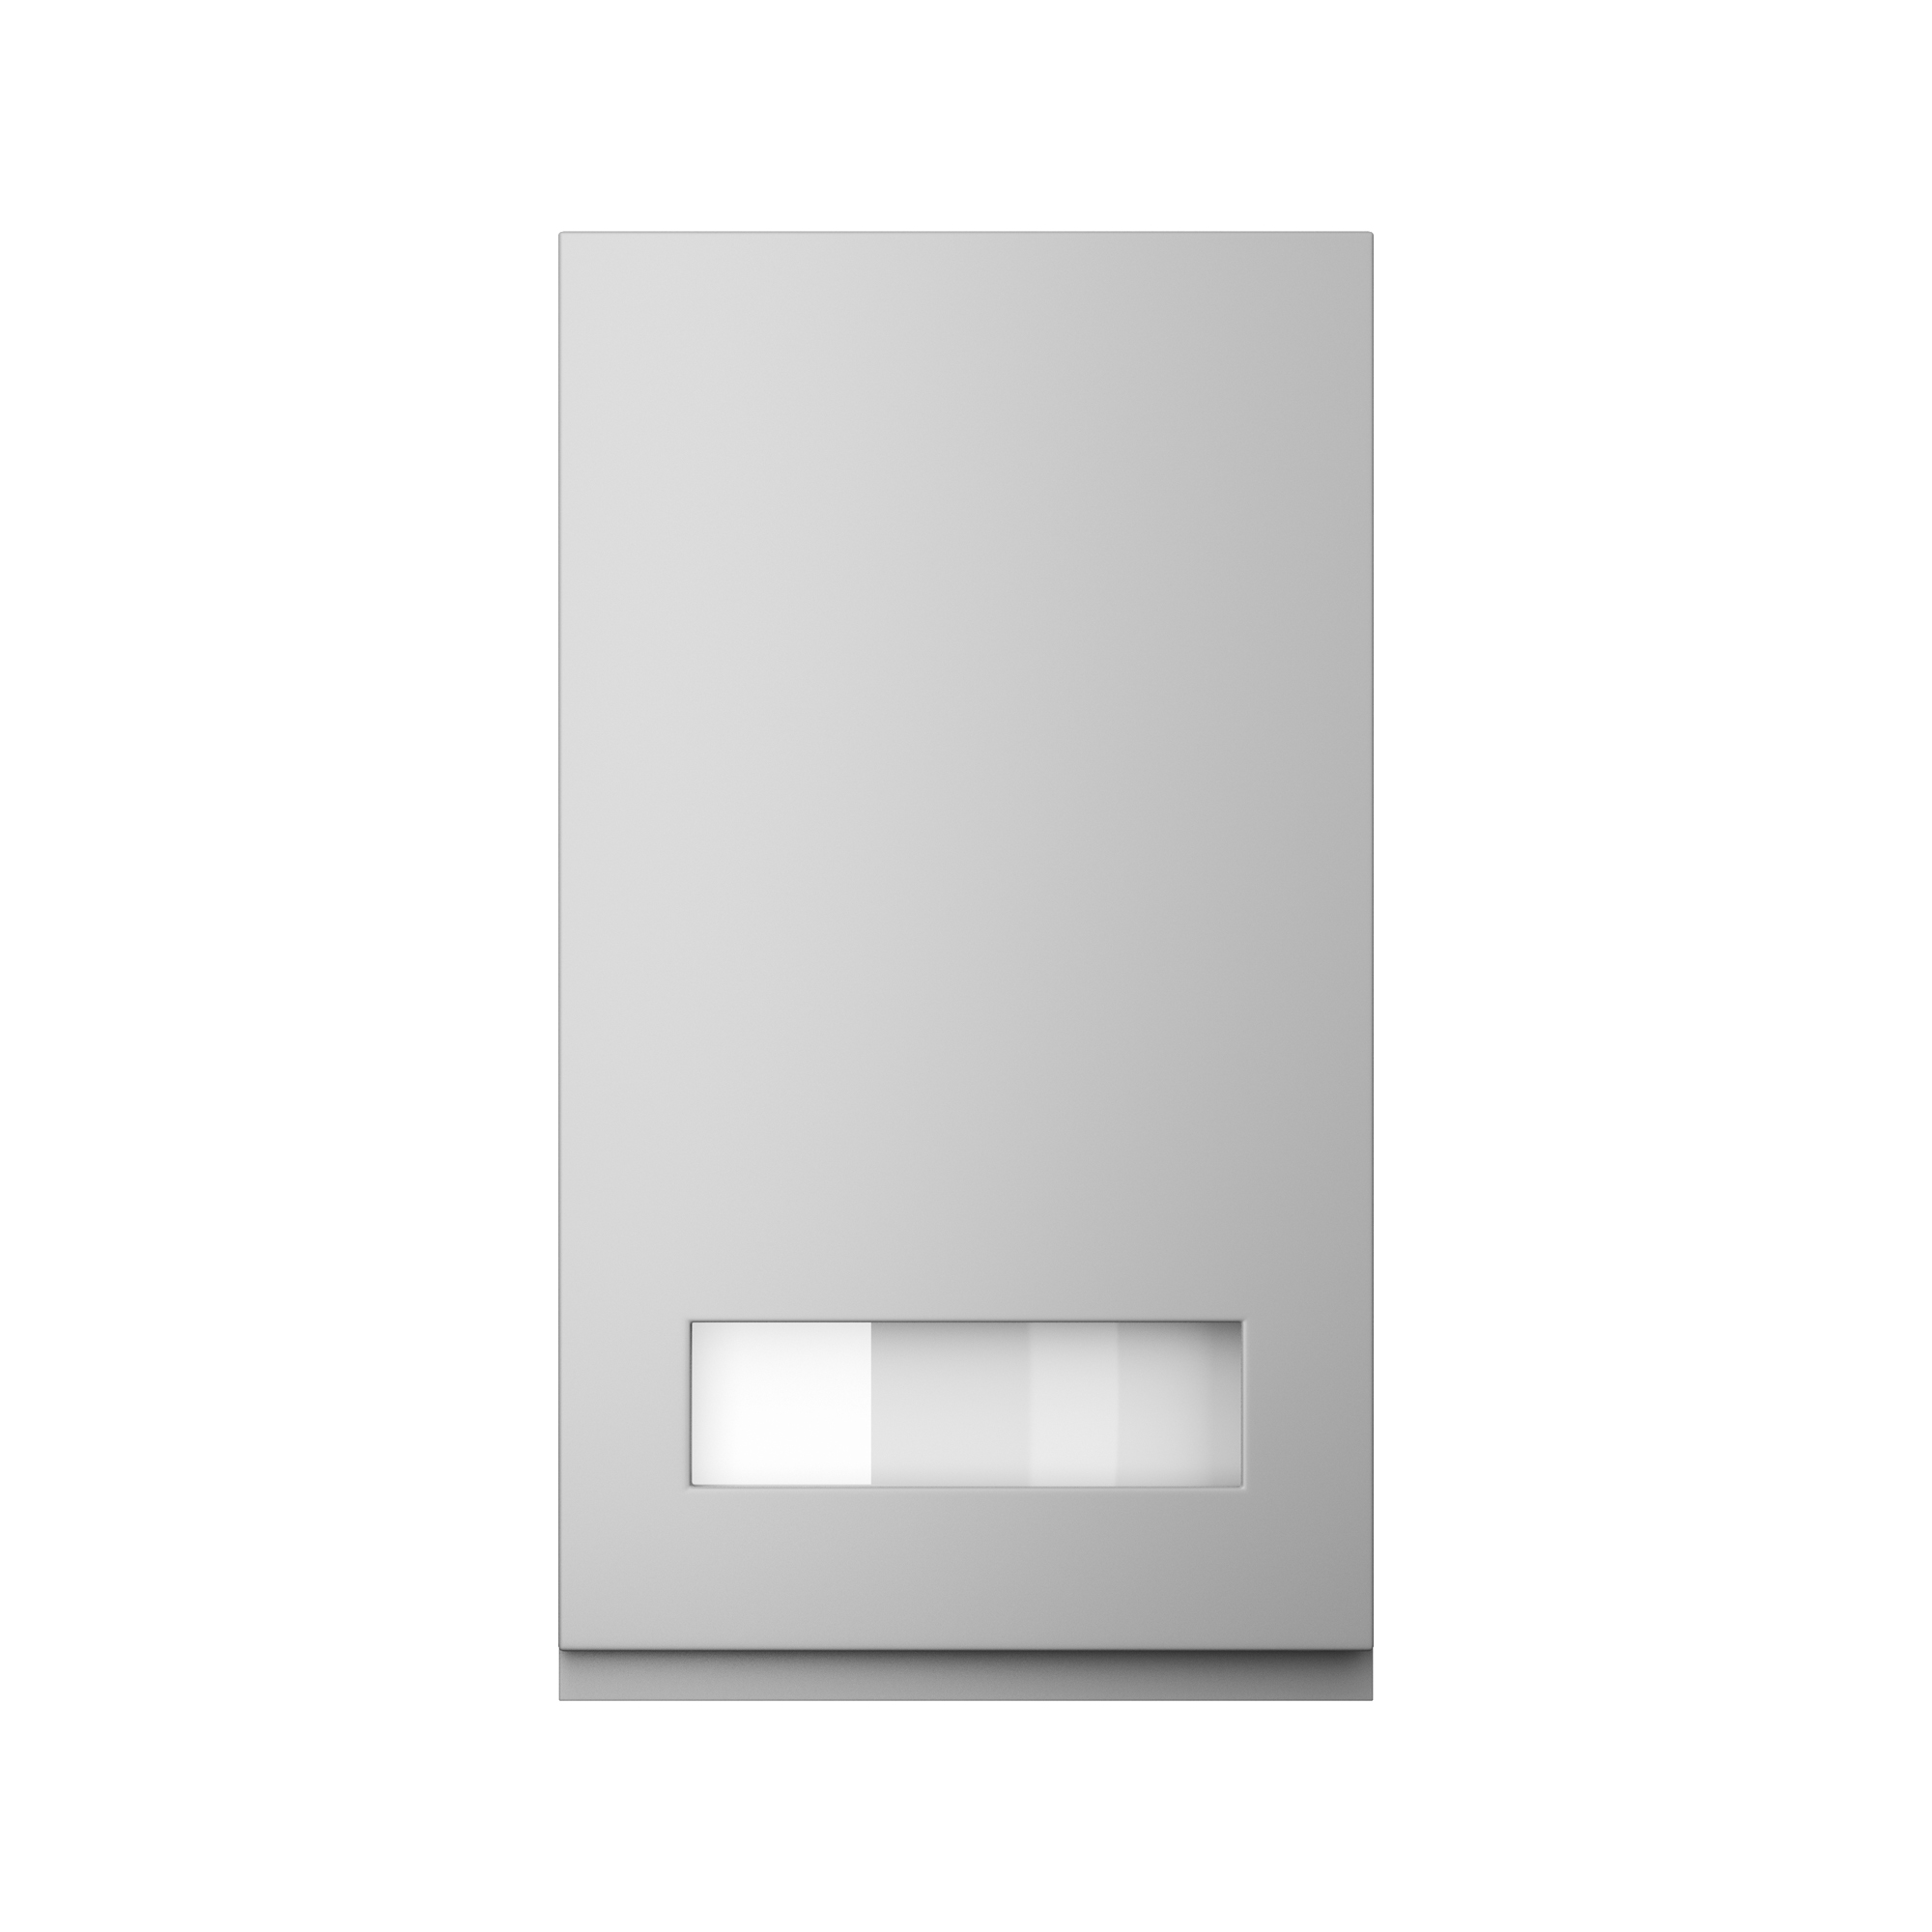 355 X 997 Letterbox Frame Includes Clear Glass - Strada Porcelain Gloss